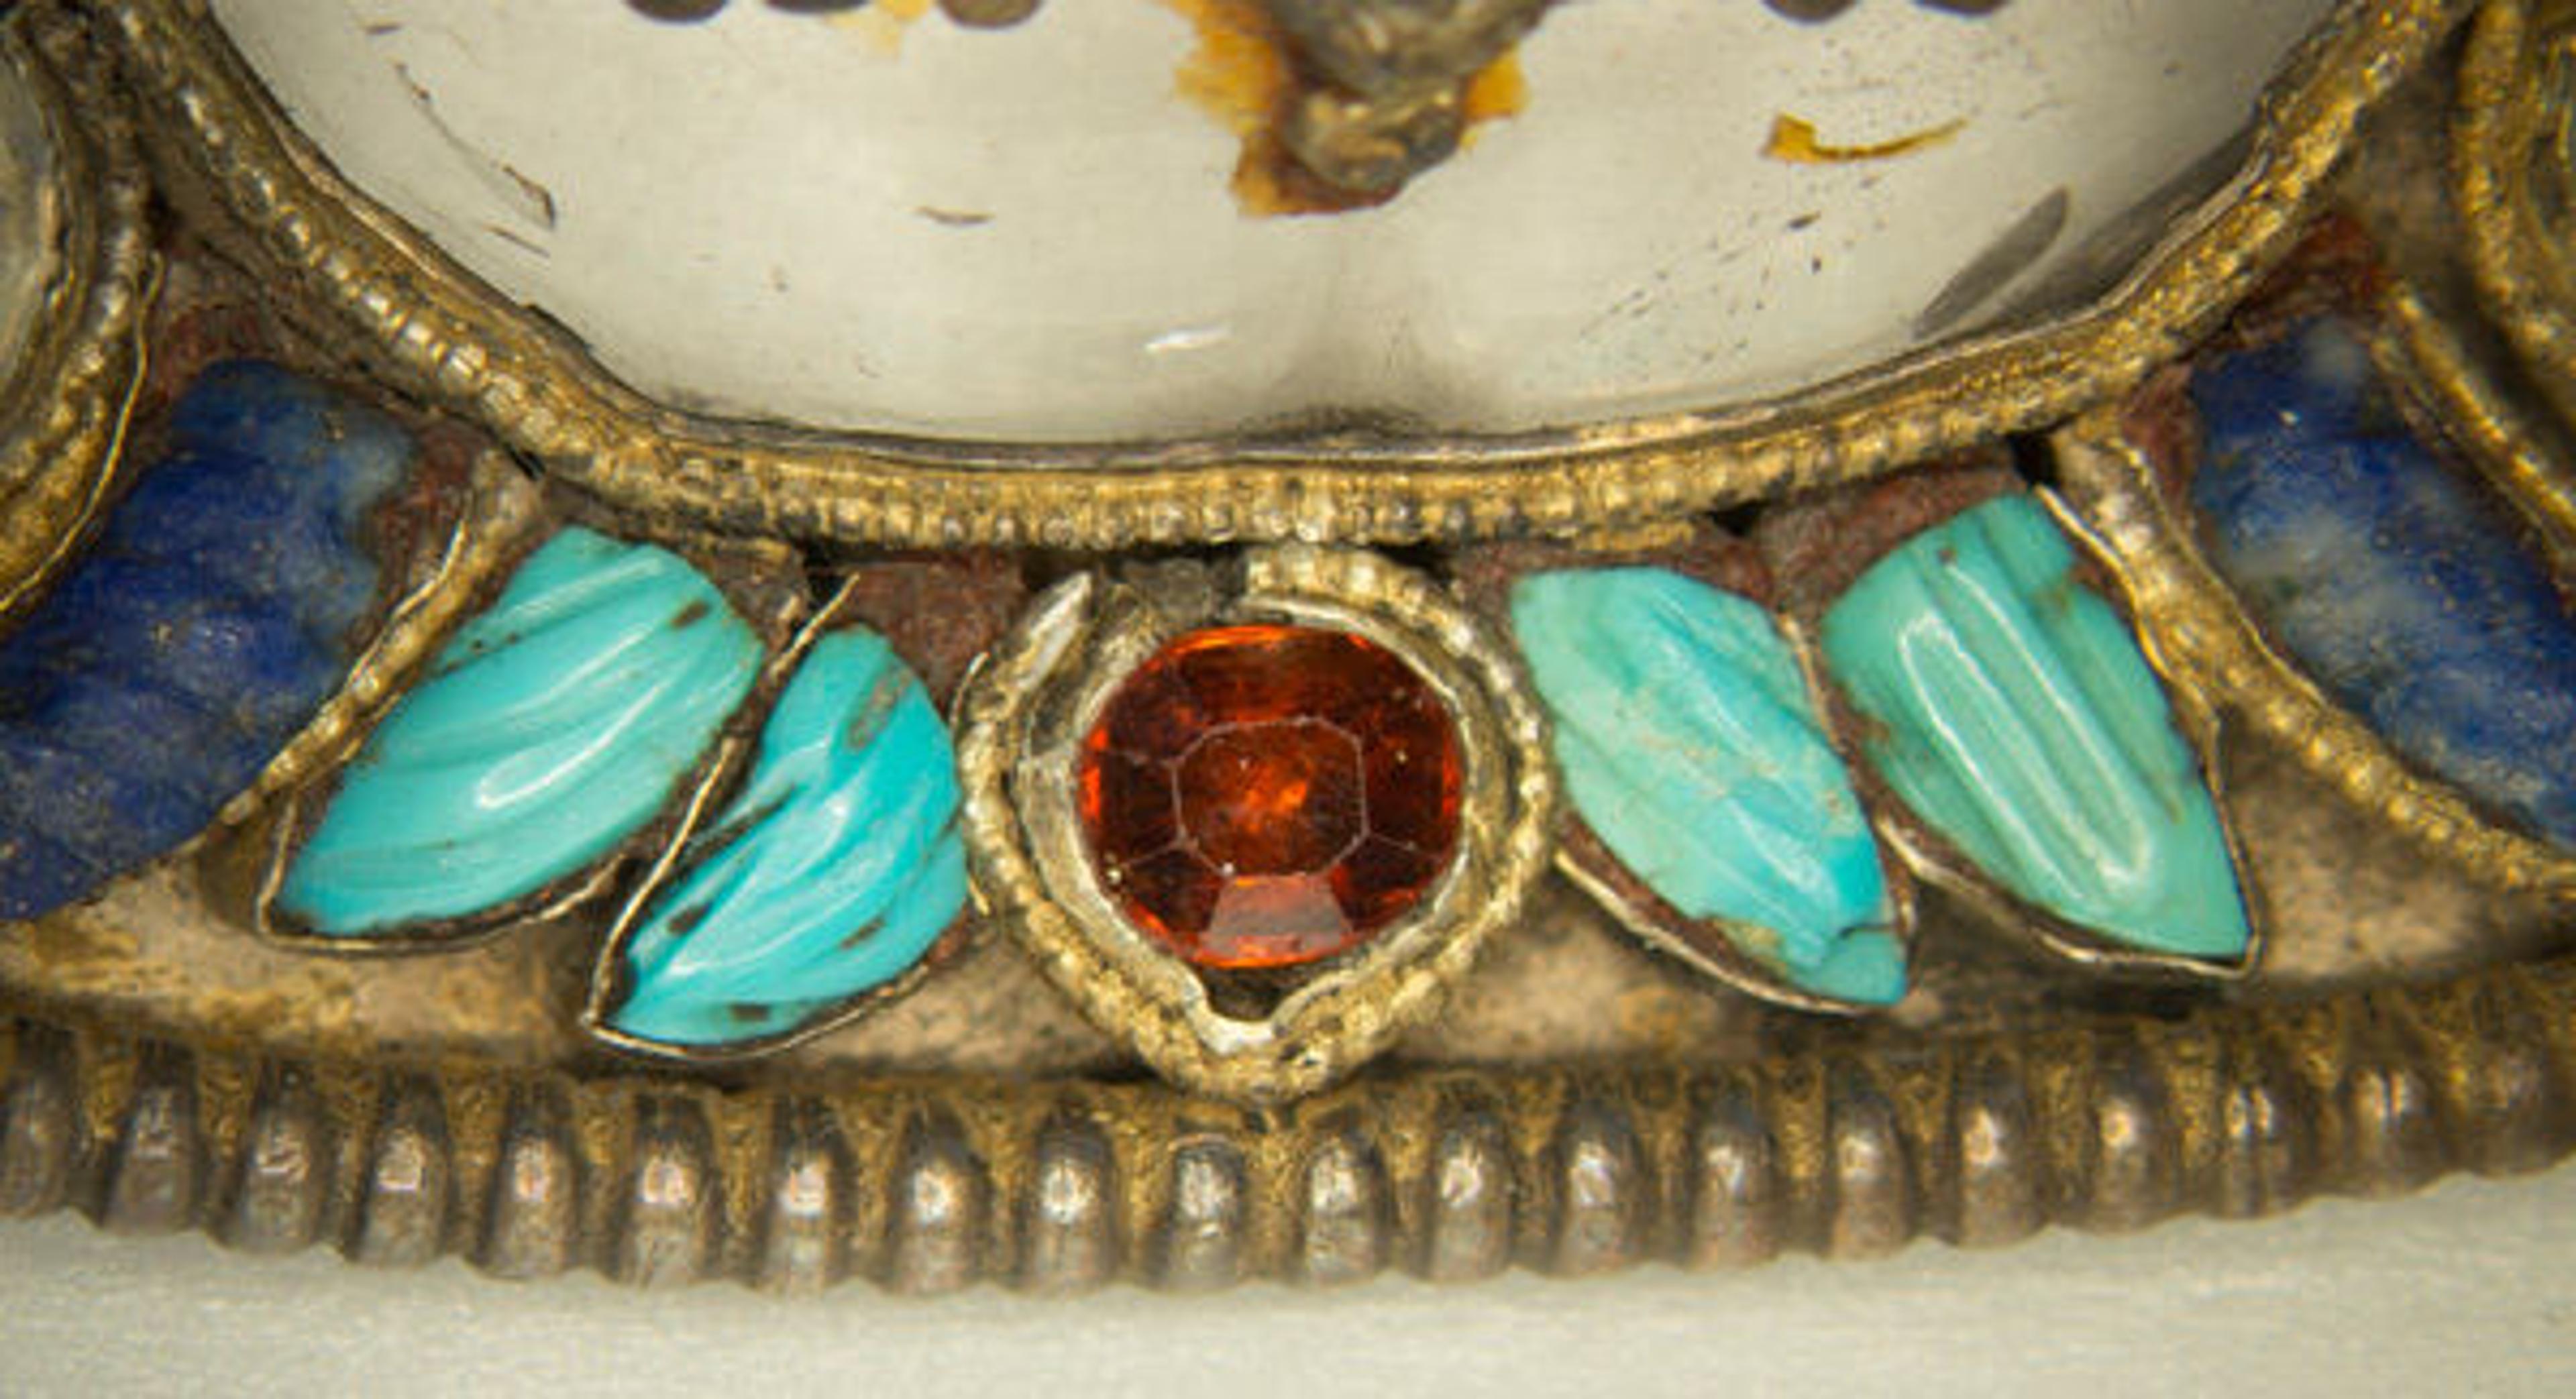 Detail showing bezel setting (center red-orange stone) and opaque red-resin setting (adjacent turquoise and lapis stones). Dish for ritual offerings, 17th–19th century | Nepal | 15.95.168